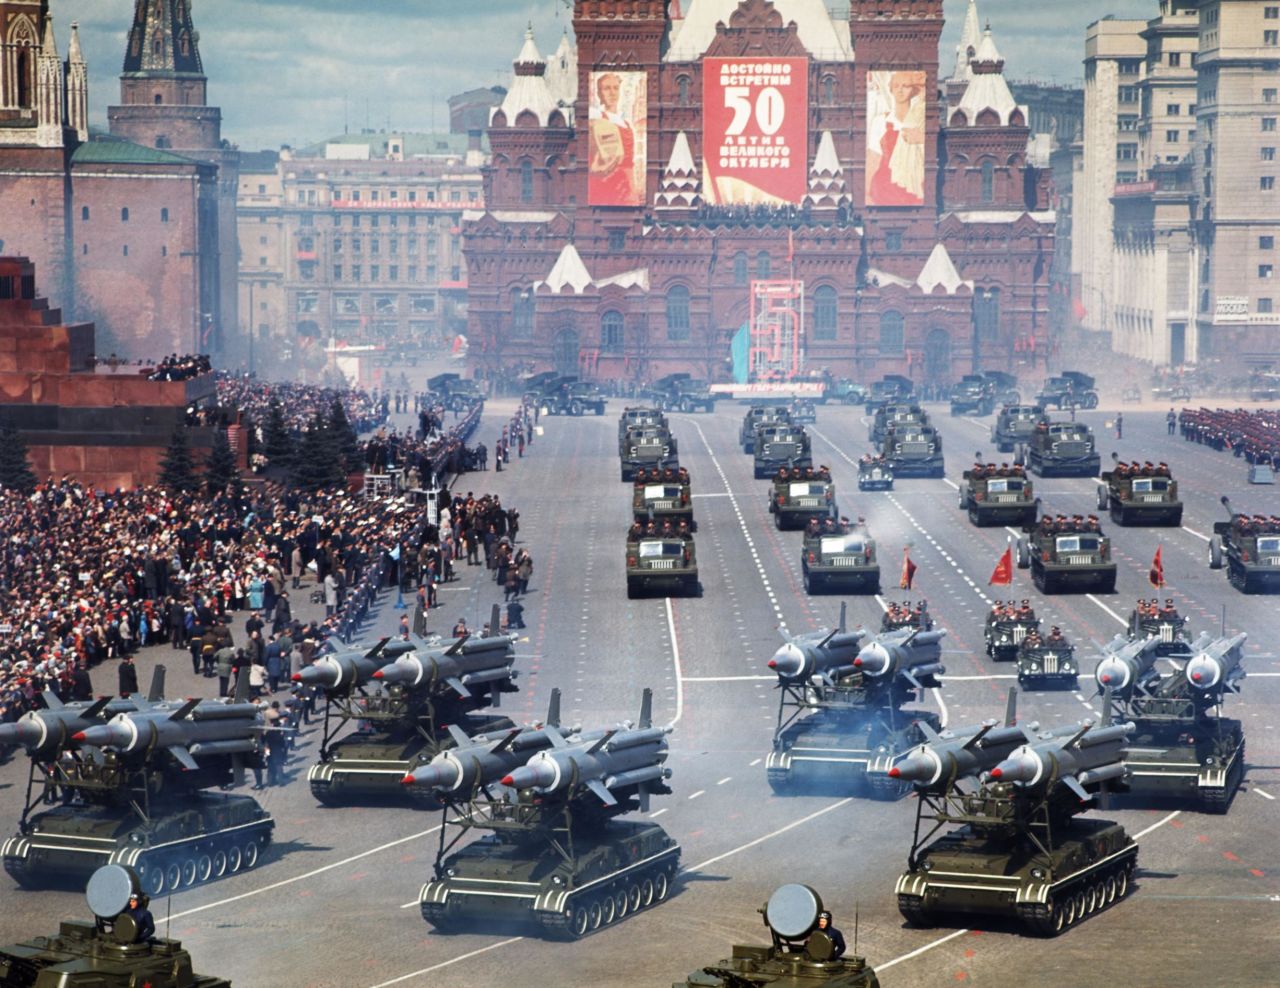 Missile launchers are on display during a military parade in Moscow's Red Square in 1967.